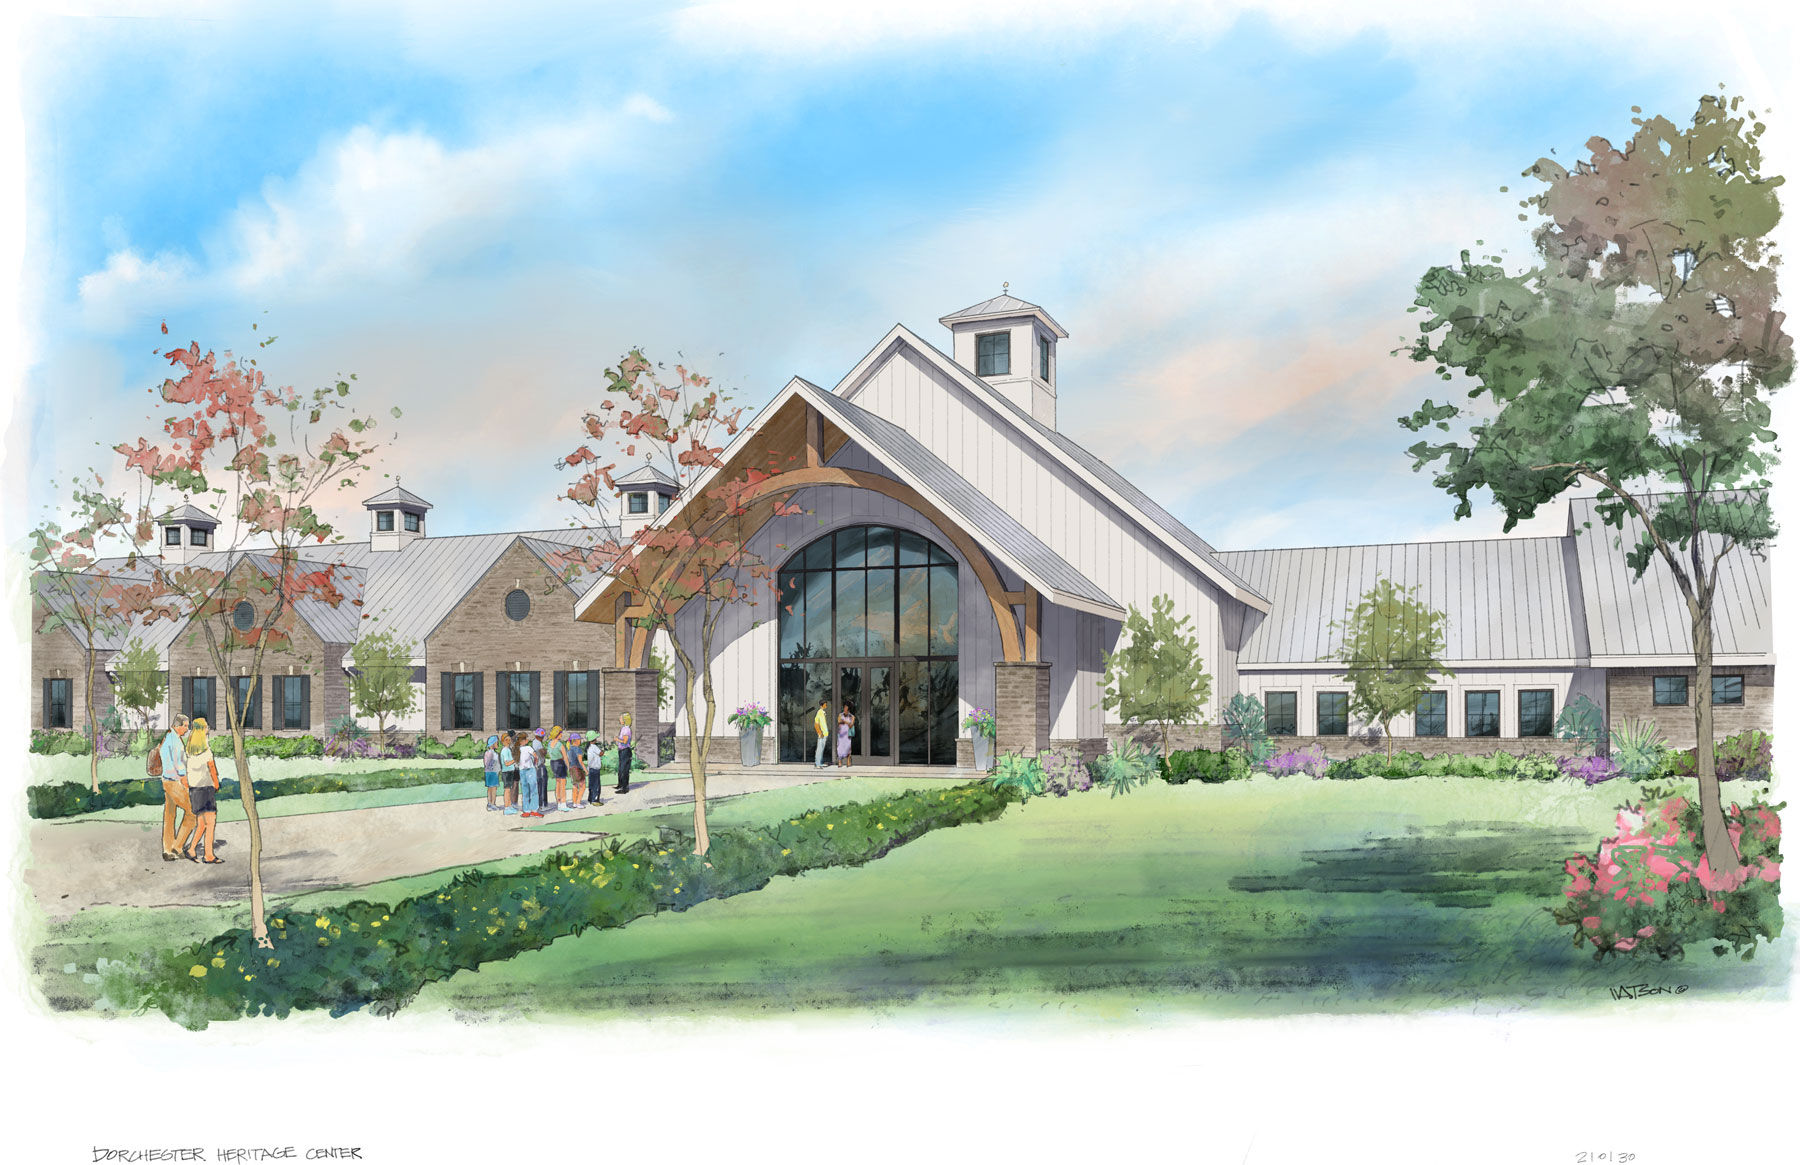 Dorchester County Heritage Center Dale Watson rendering of Swallowtail Architecture design